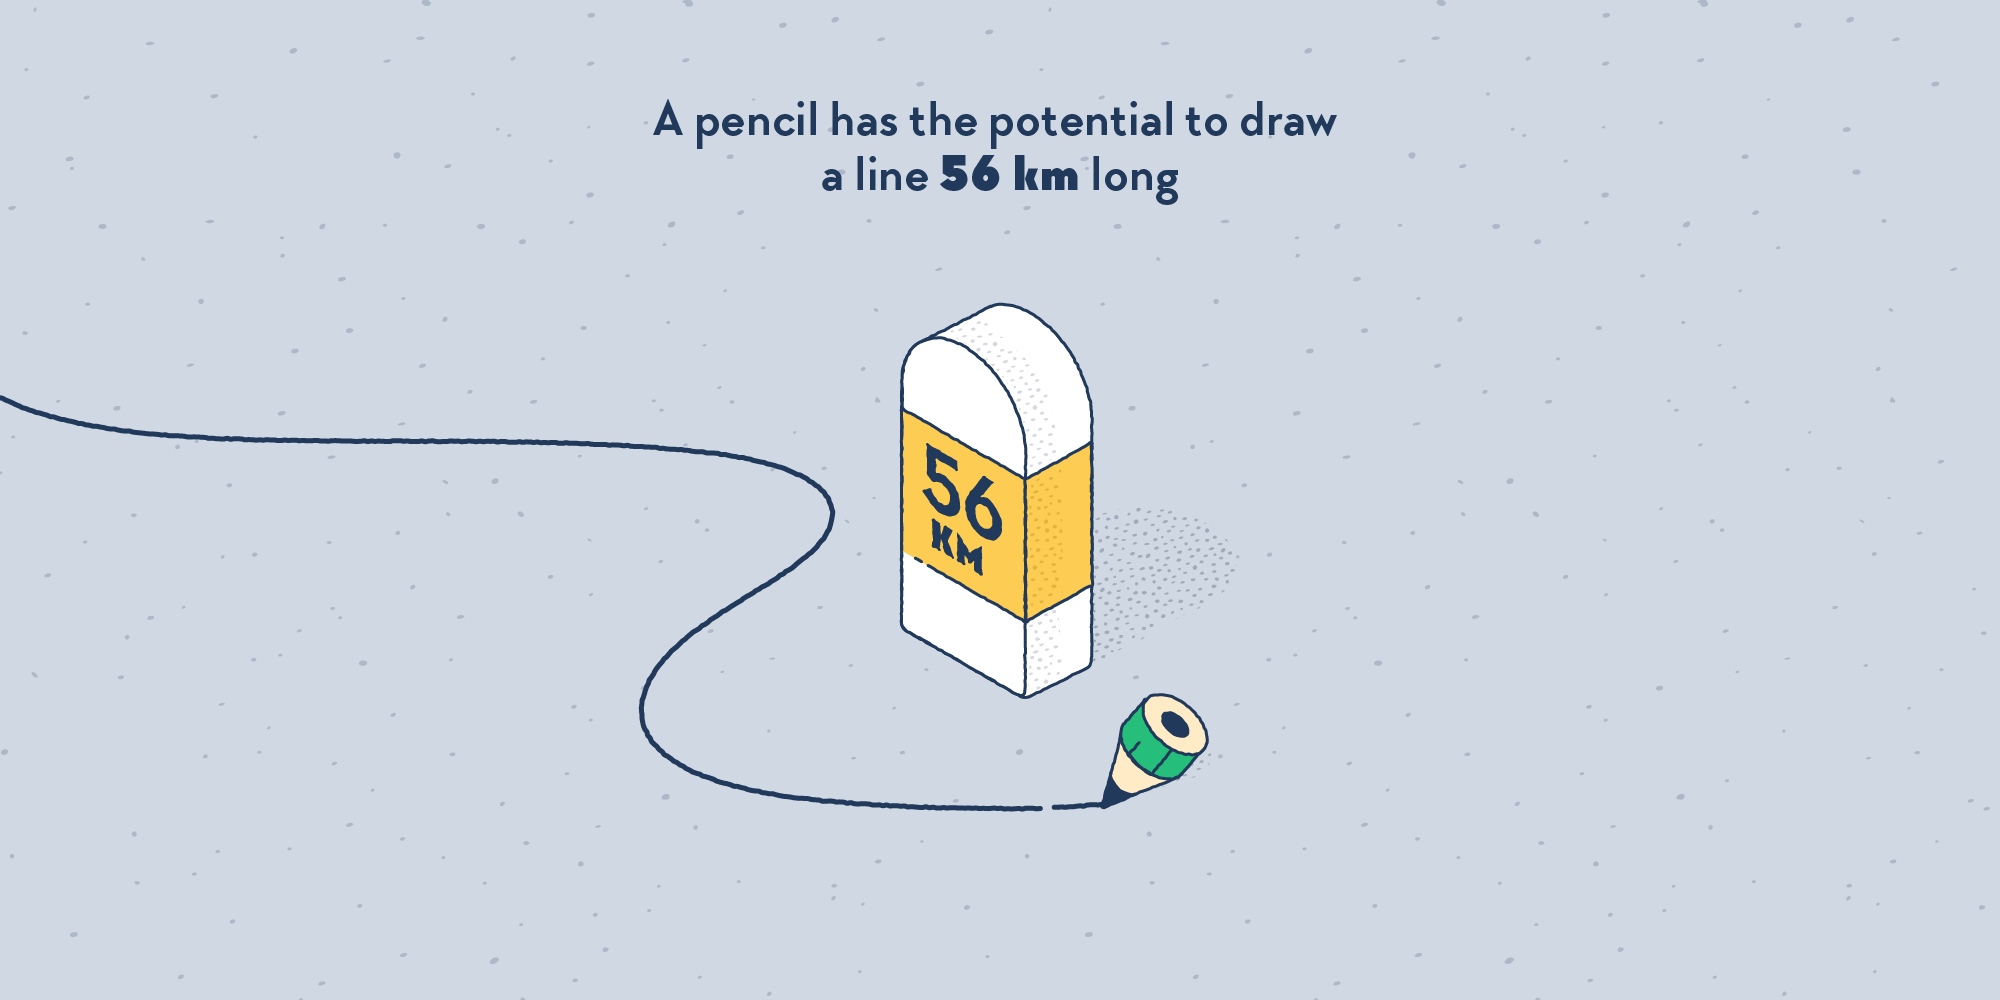 A pencil so used it’s very short, drawing a long line on the floor as it passes a milestone marked “56 km”.